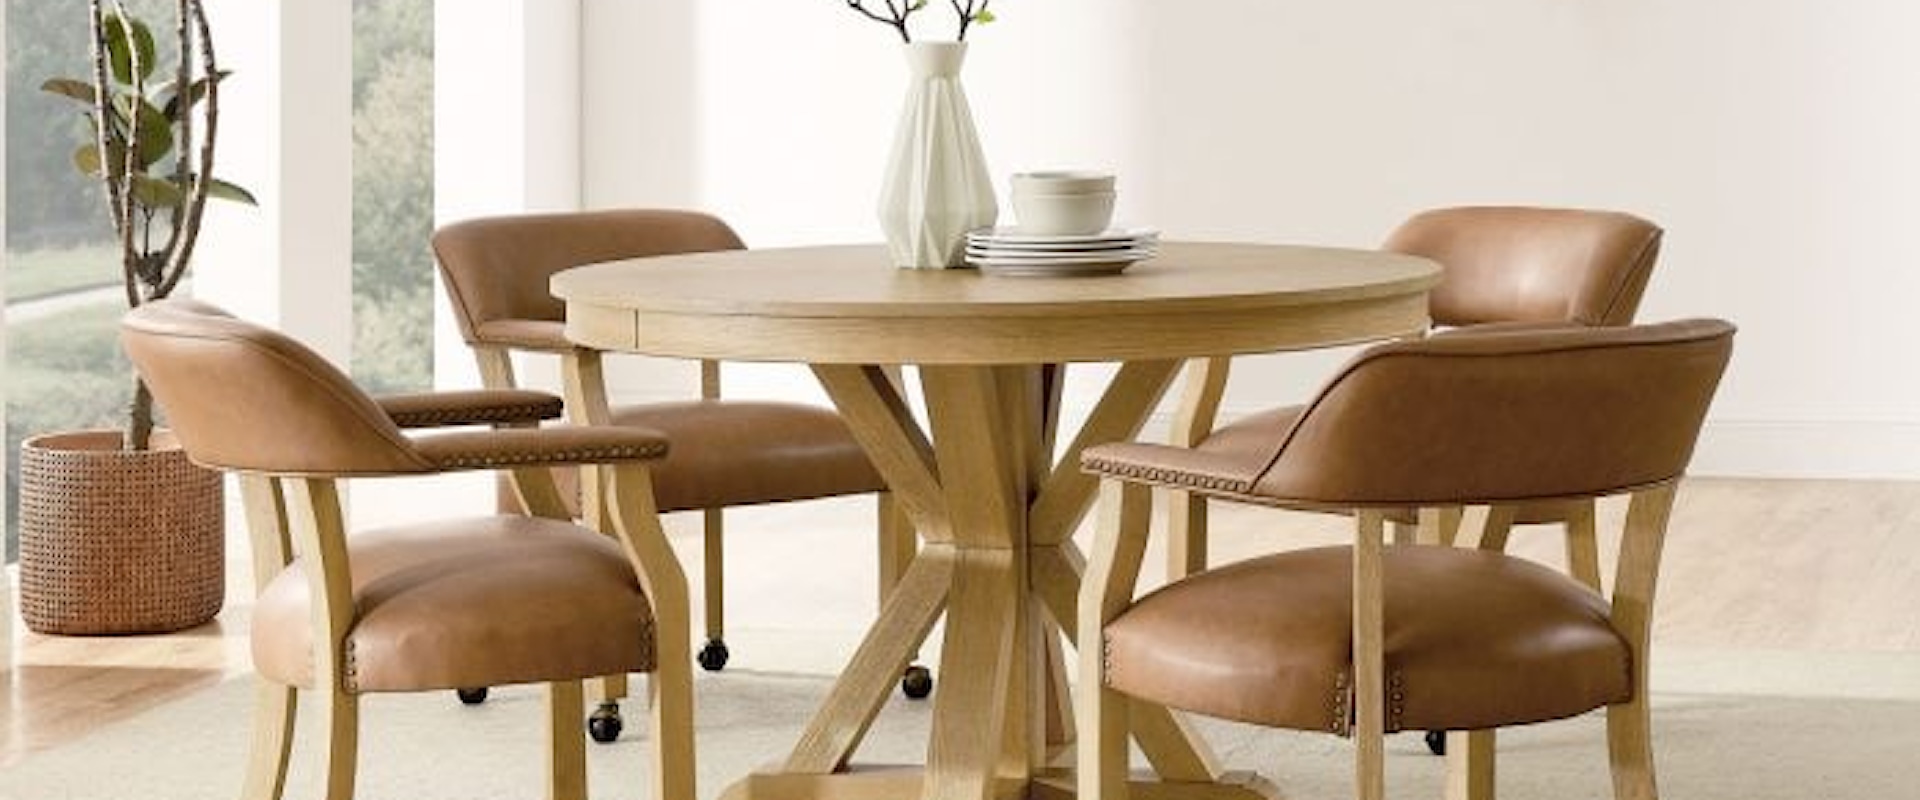 Rustic 6-Piece Game Table Top Dining Set - Natural